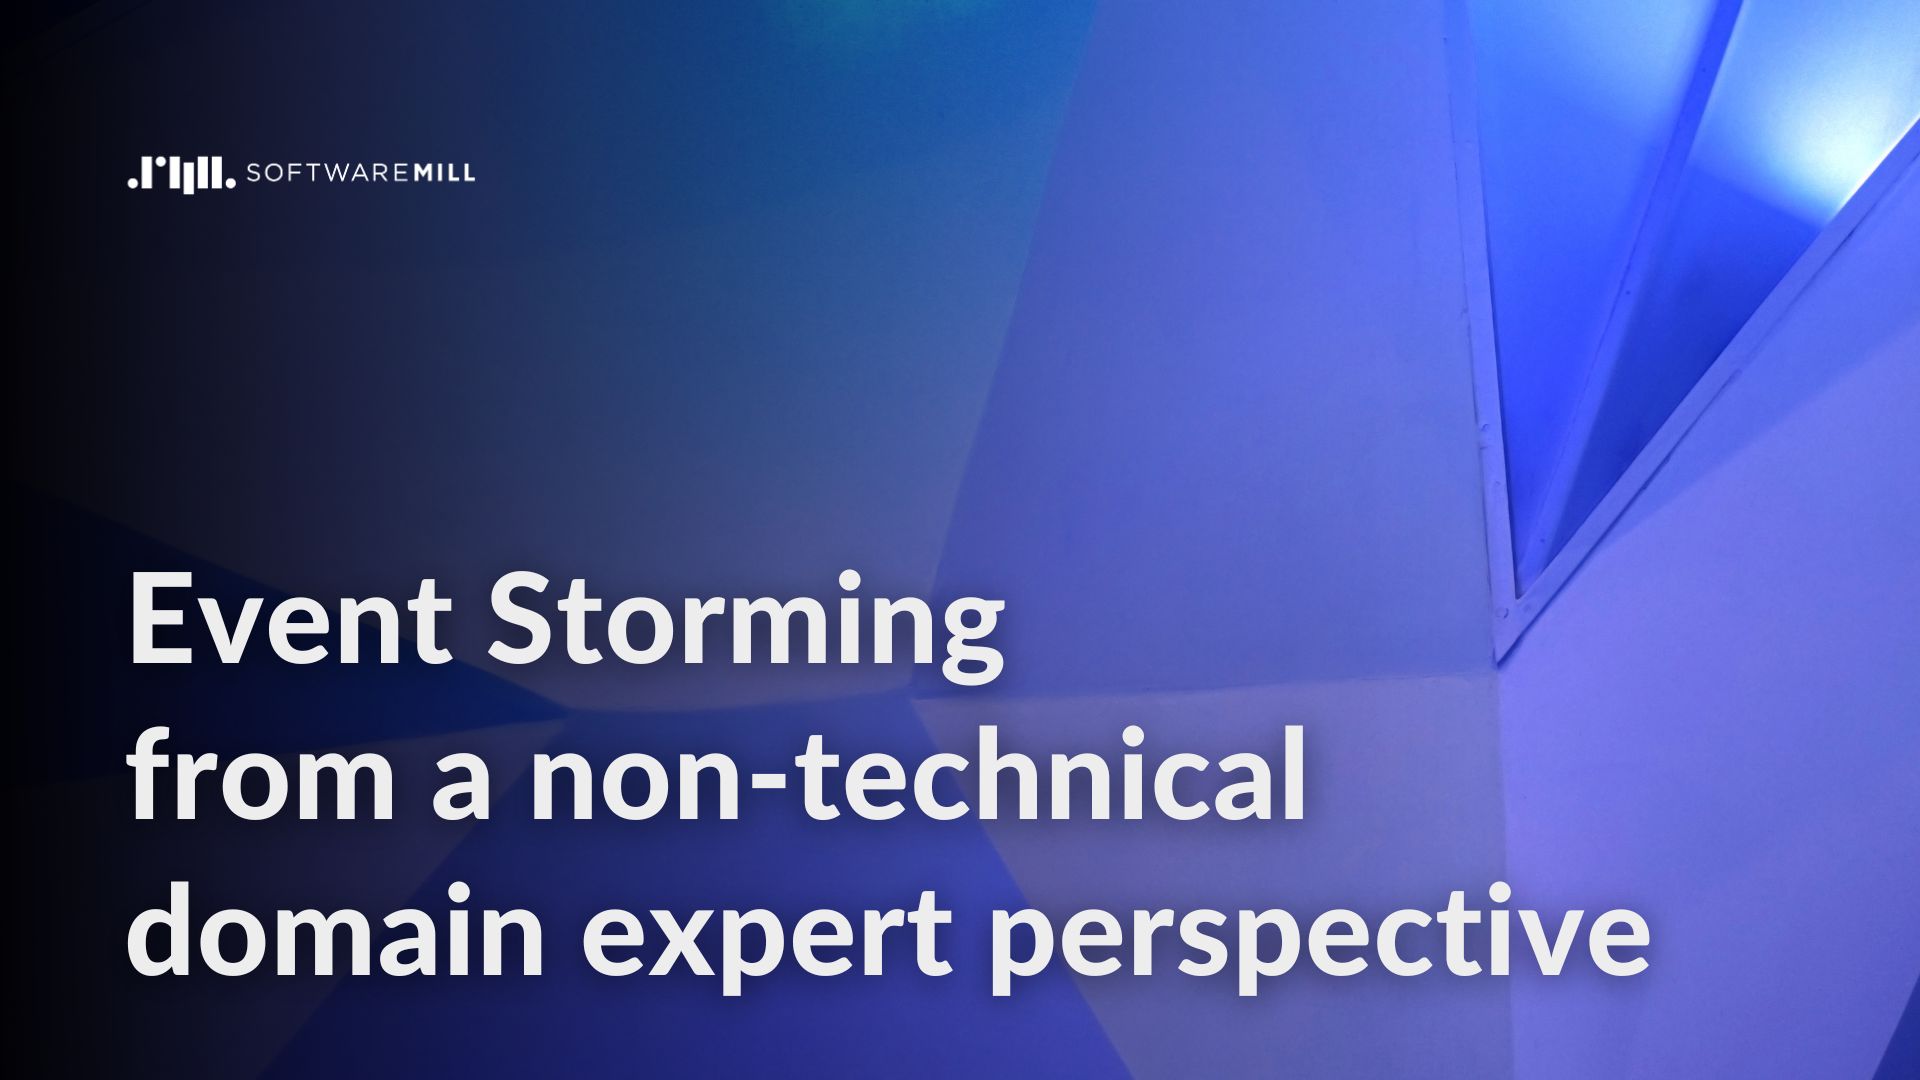 Event Storming from a non-technical domain expert perspective webp image